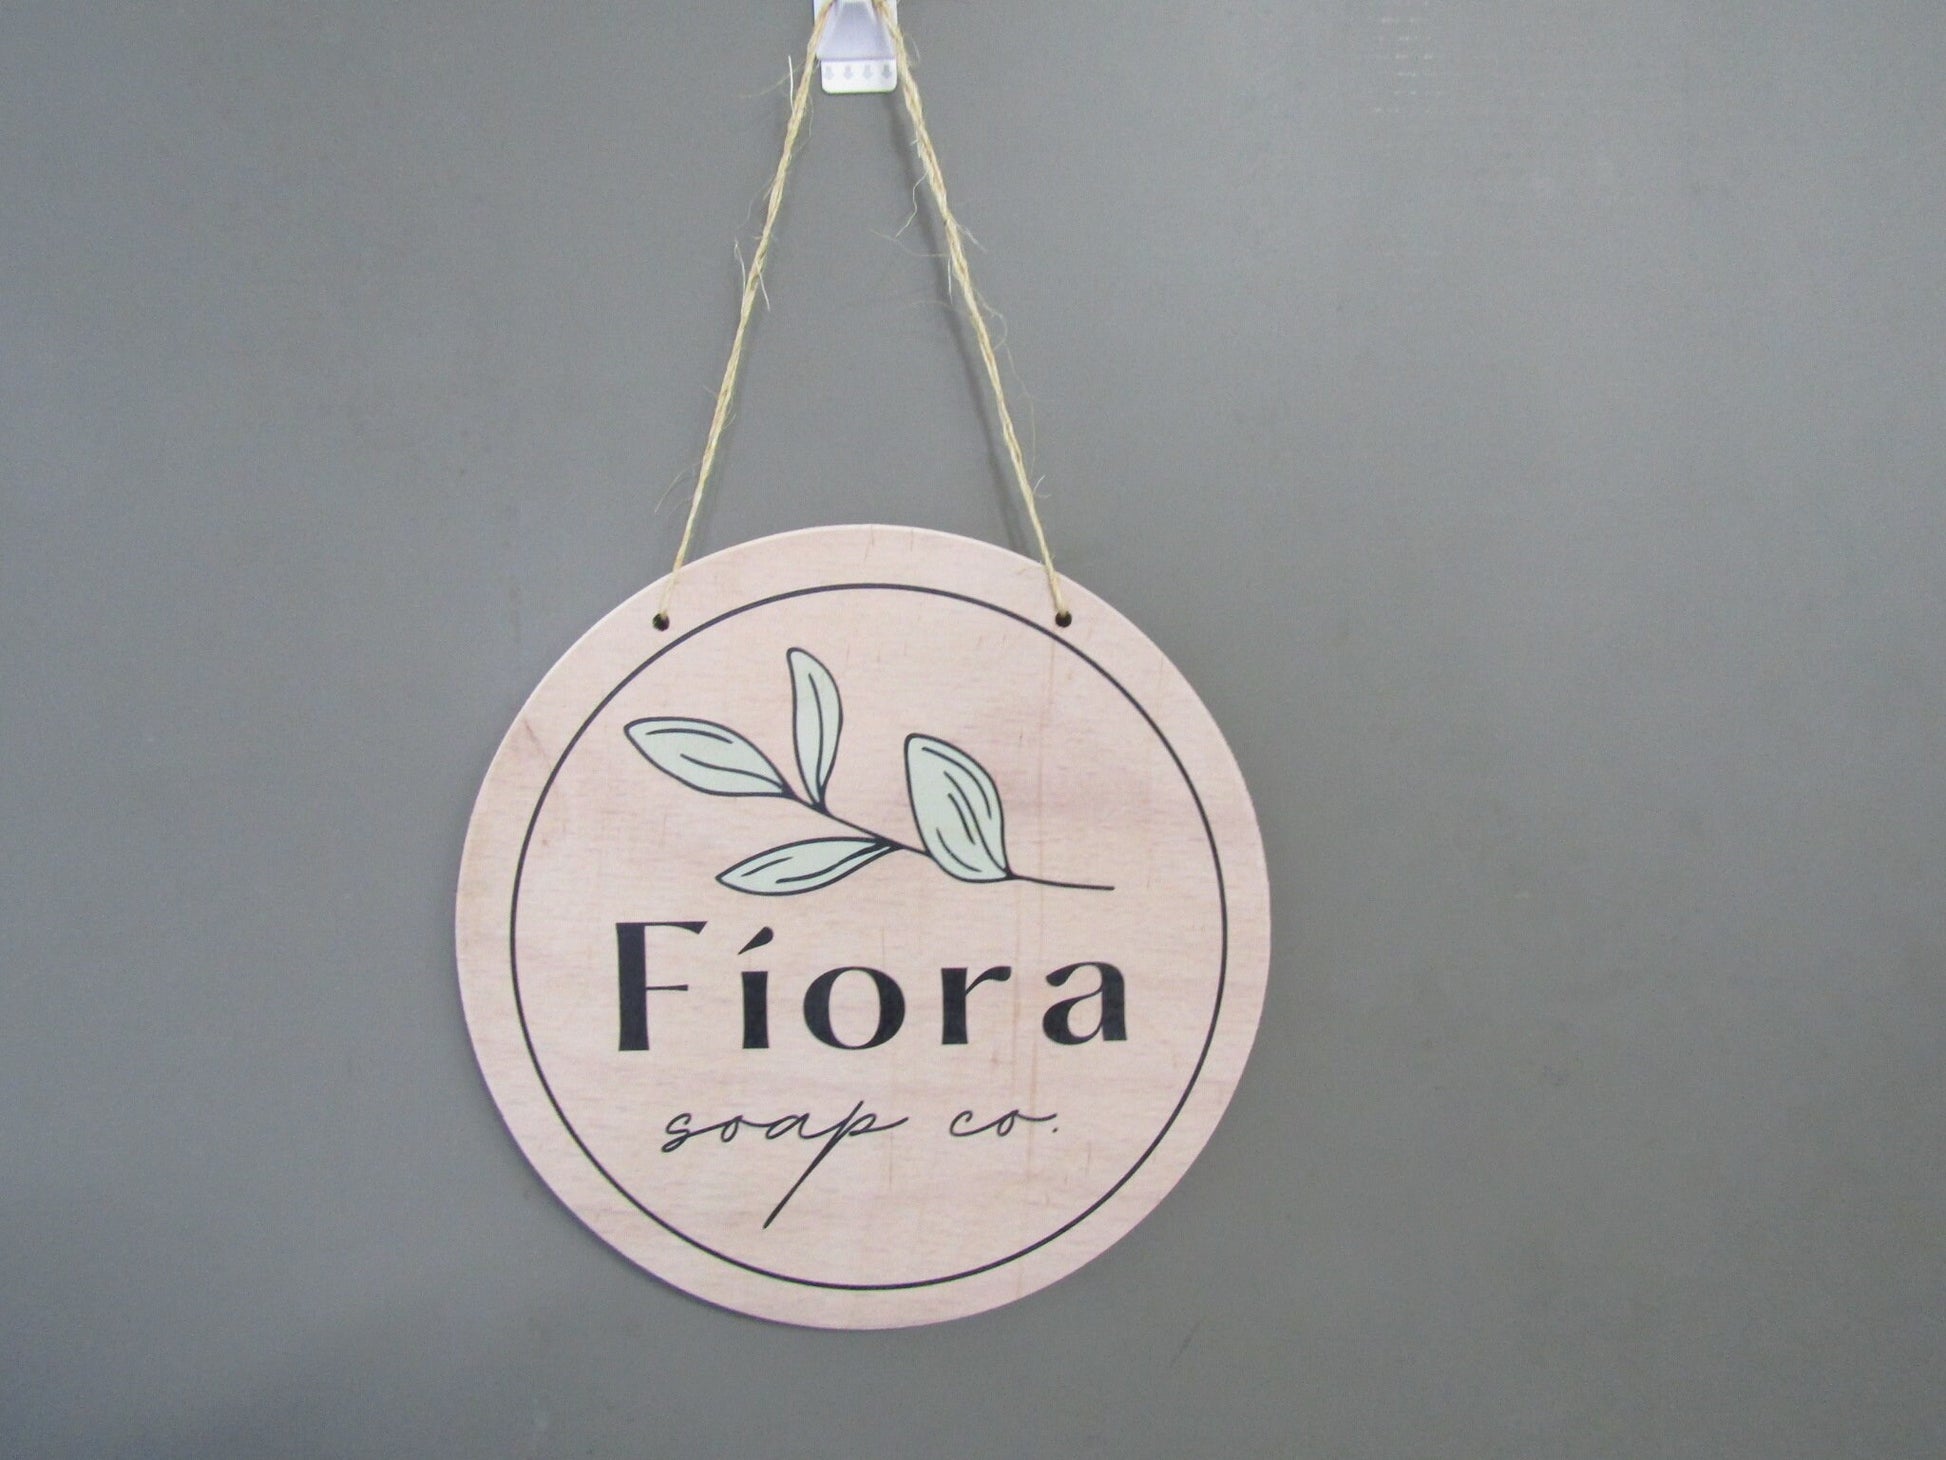 Soap Co. Fiora Greenery Booth Vendor Sign Small Business Company Commerical Signage Your Logo Image Printed on Wood Light Weight Handmade